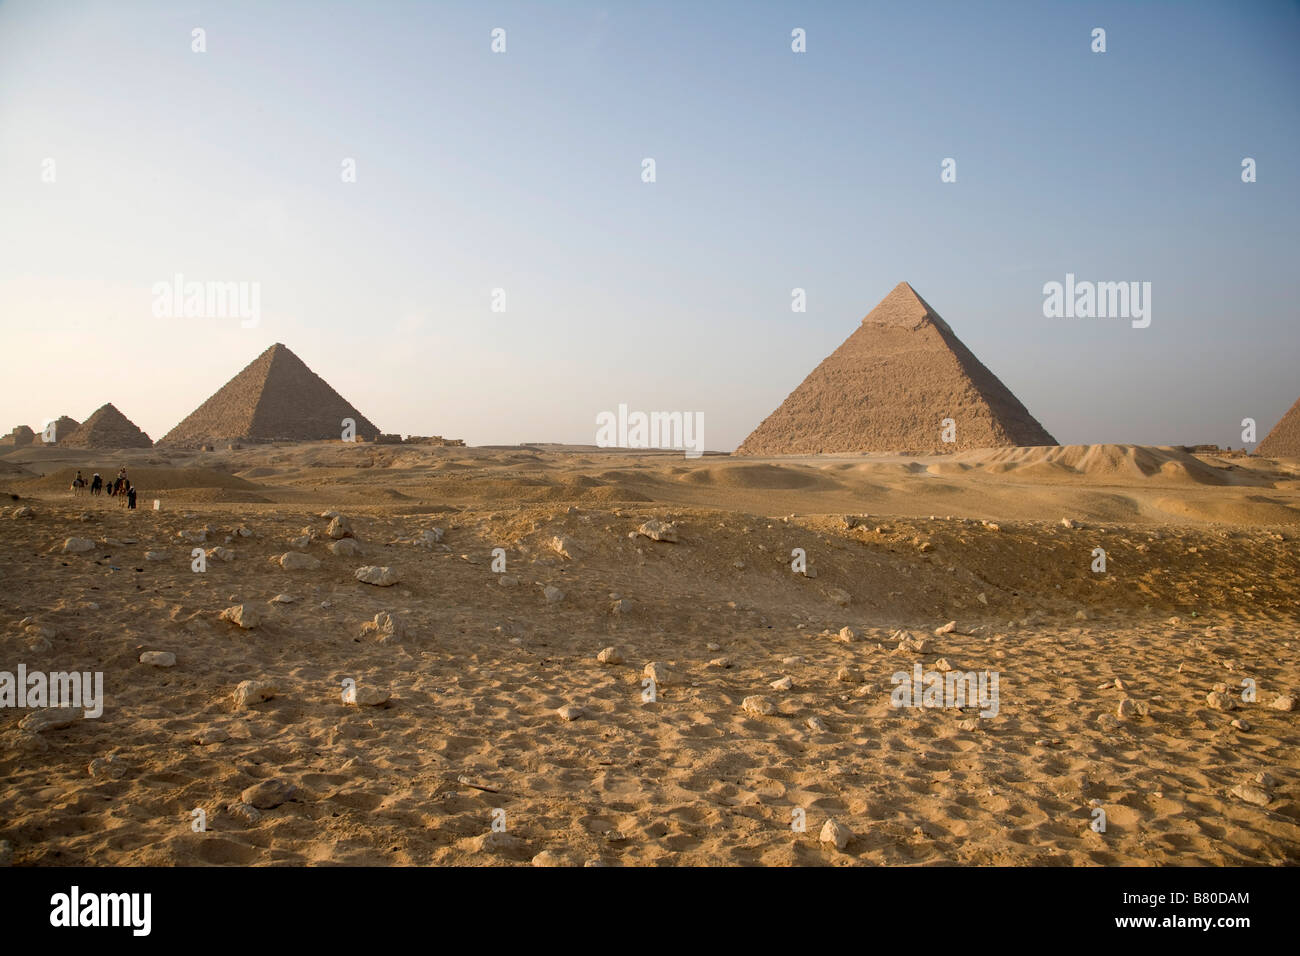 Pyramids, Giza, Sand, Desert, Egypt, hot, holiday, travel, Archaeology, Ancient civilization, Beautiful view of the pyramids Cairo, Egypt, No People Stock Photo